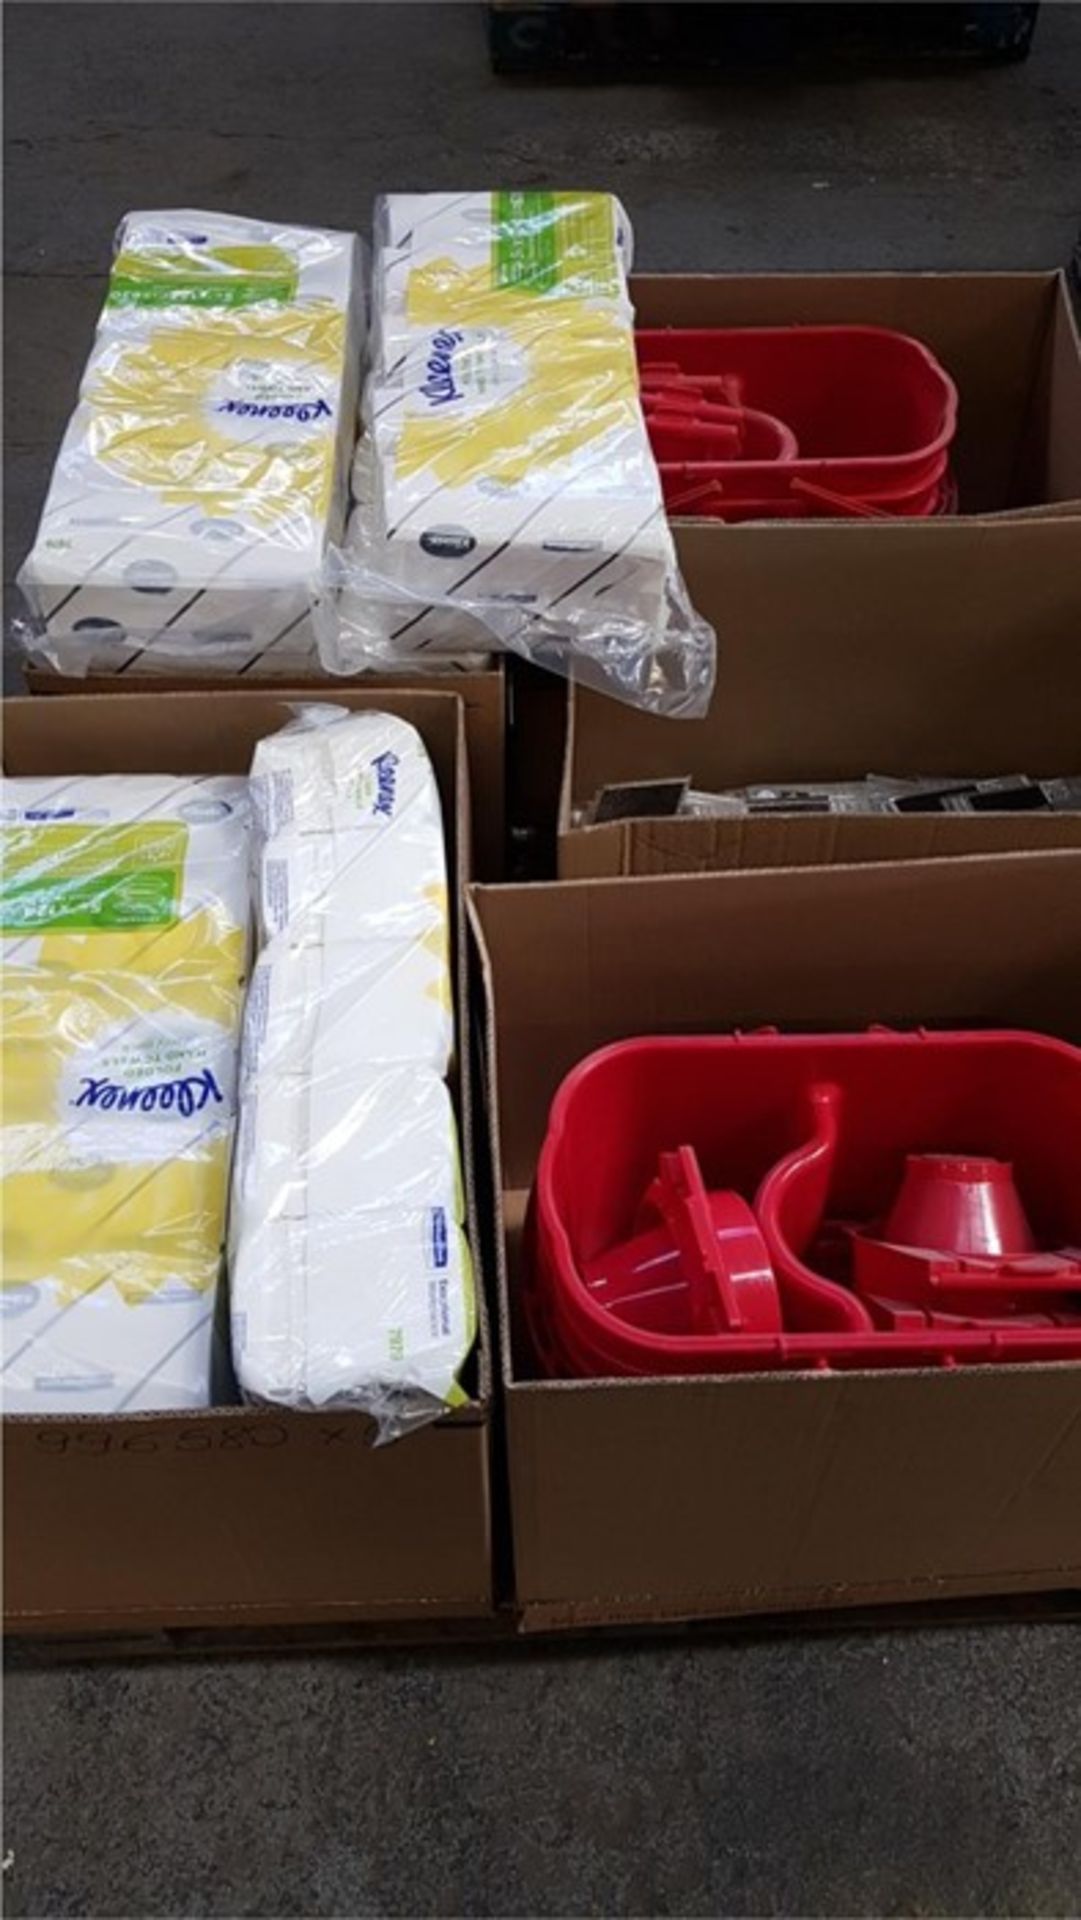 1 LOT TO CONTAIN 12 BAGGED KLEENEX FOLDED HAND TOWELS 5 PACKS TO A BAG, 7 RED DOUBLE MOP BUCKETS,